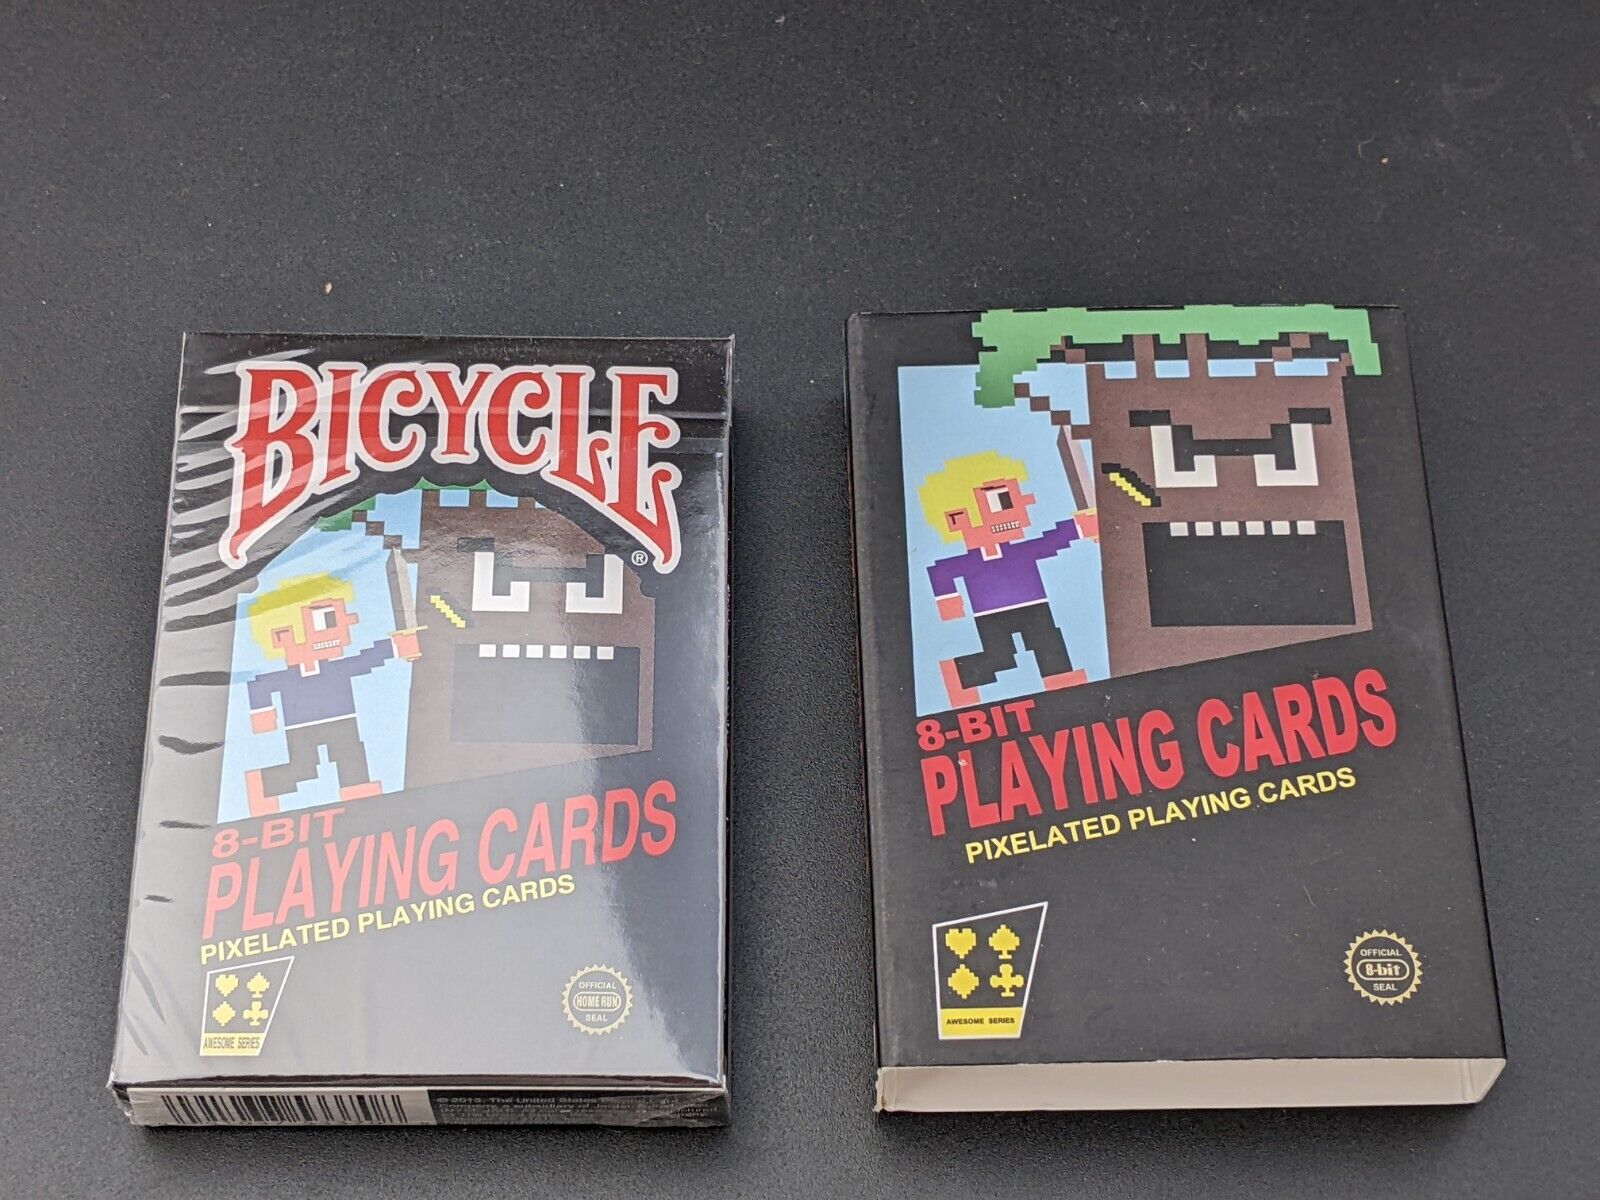 Home Run Games Bicycle 8-Bit original Playing cards w/ deck sleeve  - New Sealed